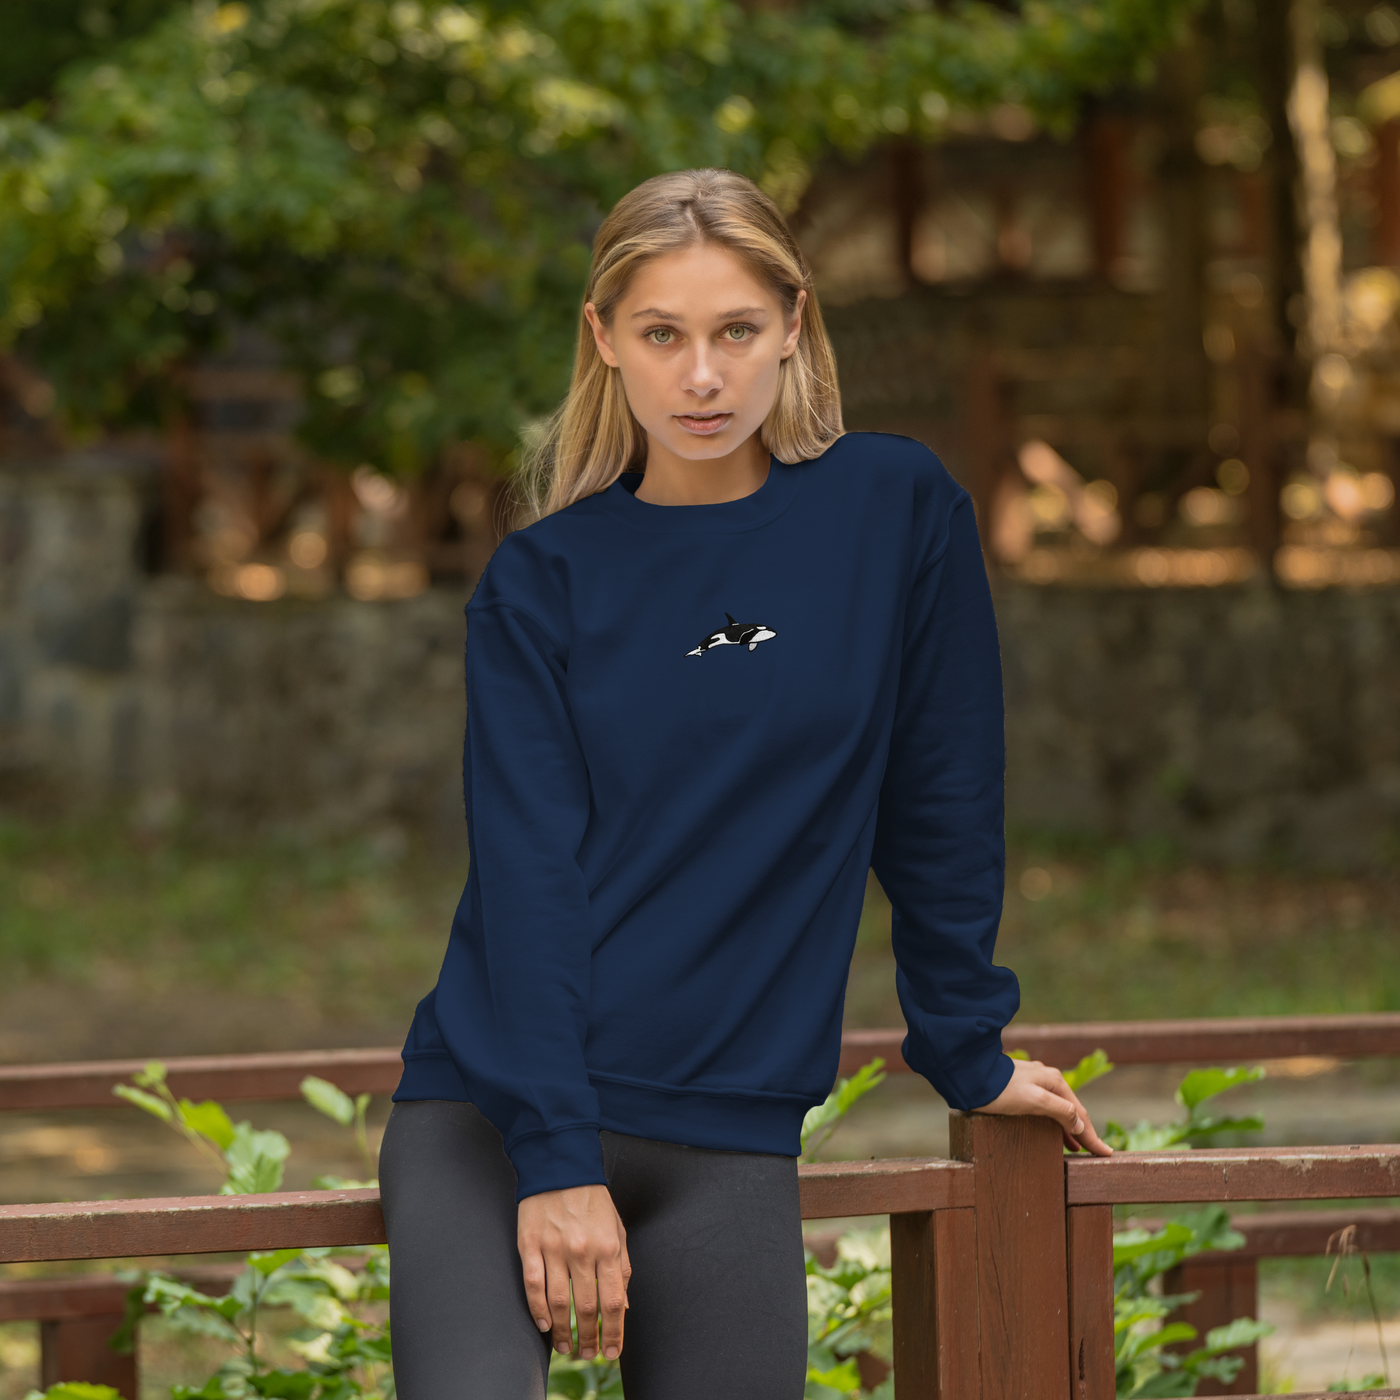 Bobby's Planet Women's Embroidered Orca Sweatshirt from Seven Seas Fish Animals Collection in Navy Color#color_navy